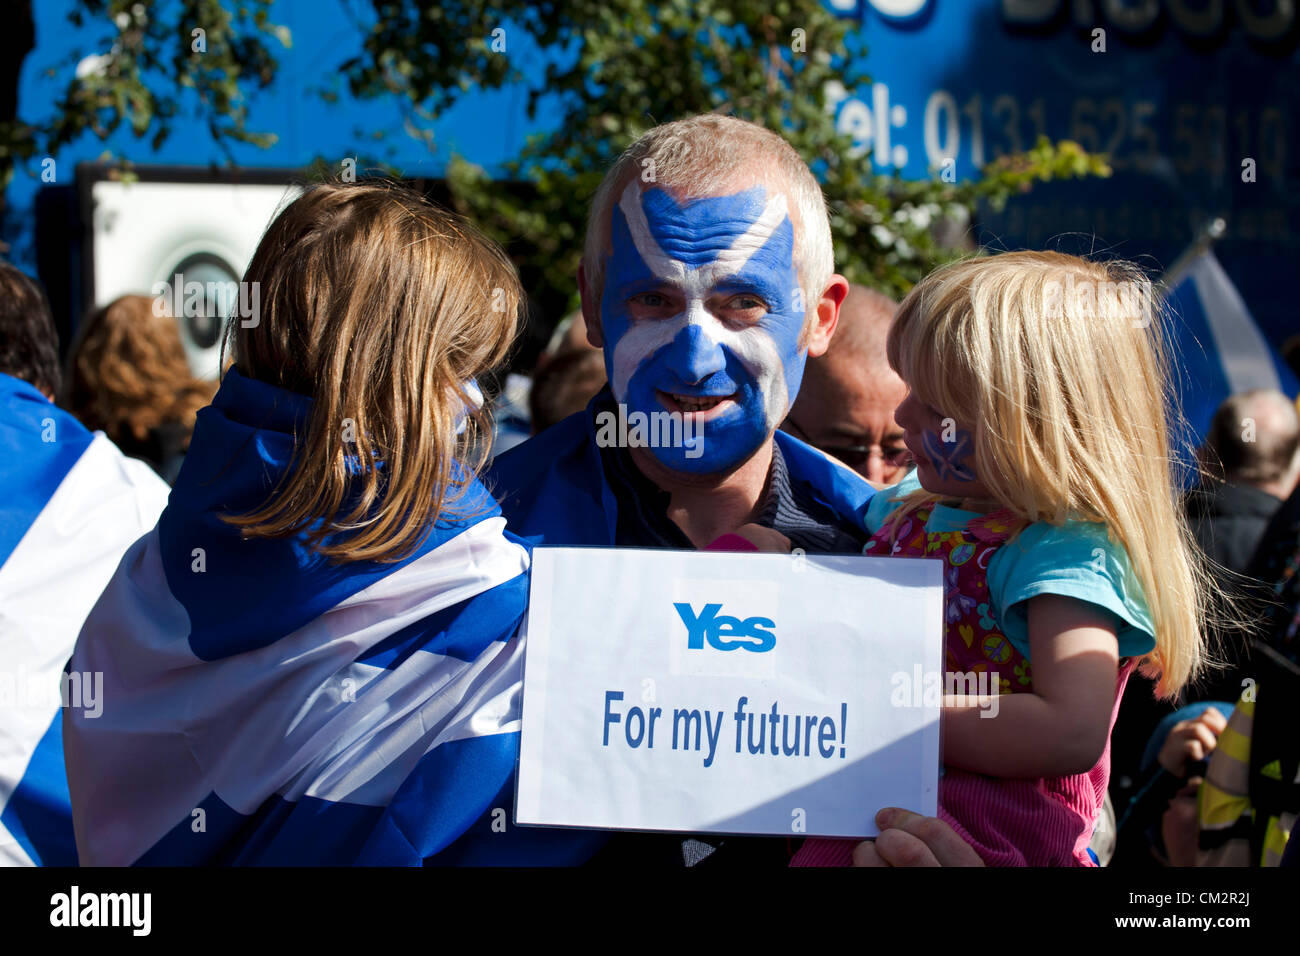 22 September 2012, Edinburgh, UK. an estimated five thousand people took part in an event in Edinburgh aimed at  demonstrating support for independence. Both young and old wearing saltire flags gathered in the Meadows  before marching to Princes Street Gardens. The rally was staged under the banner Independence for Scotland and is not part of the official Yes Scotland campaign. Stock Photo